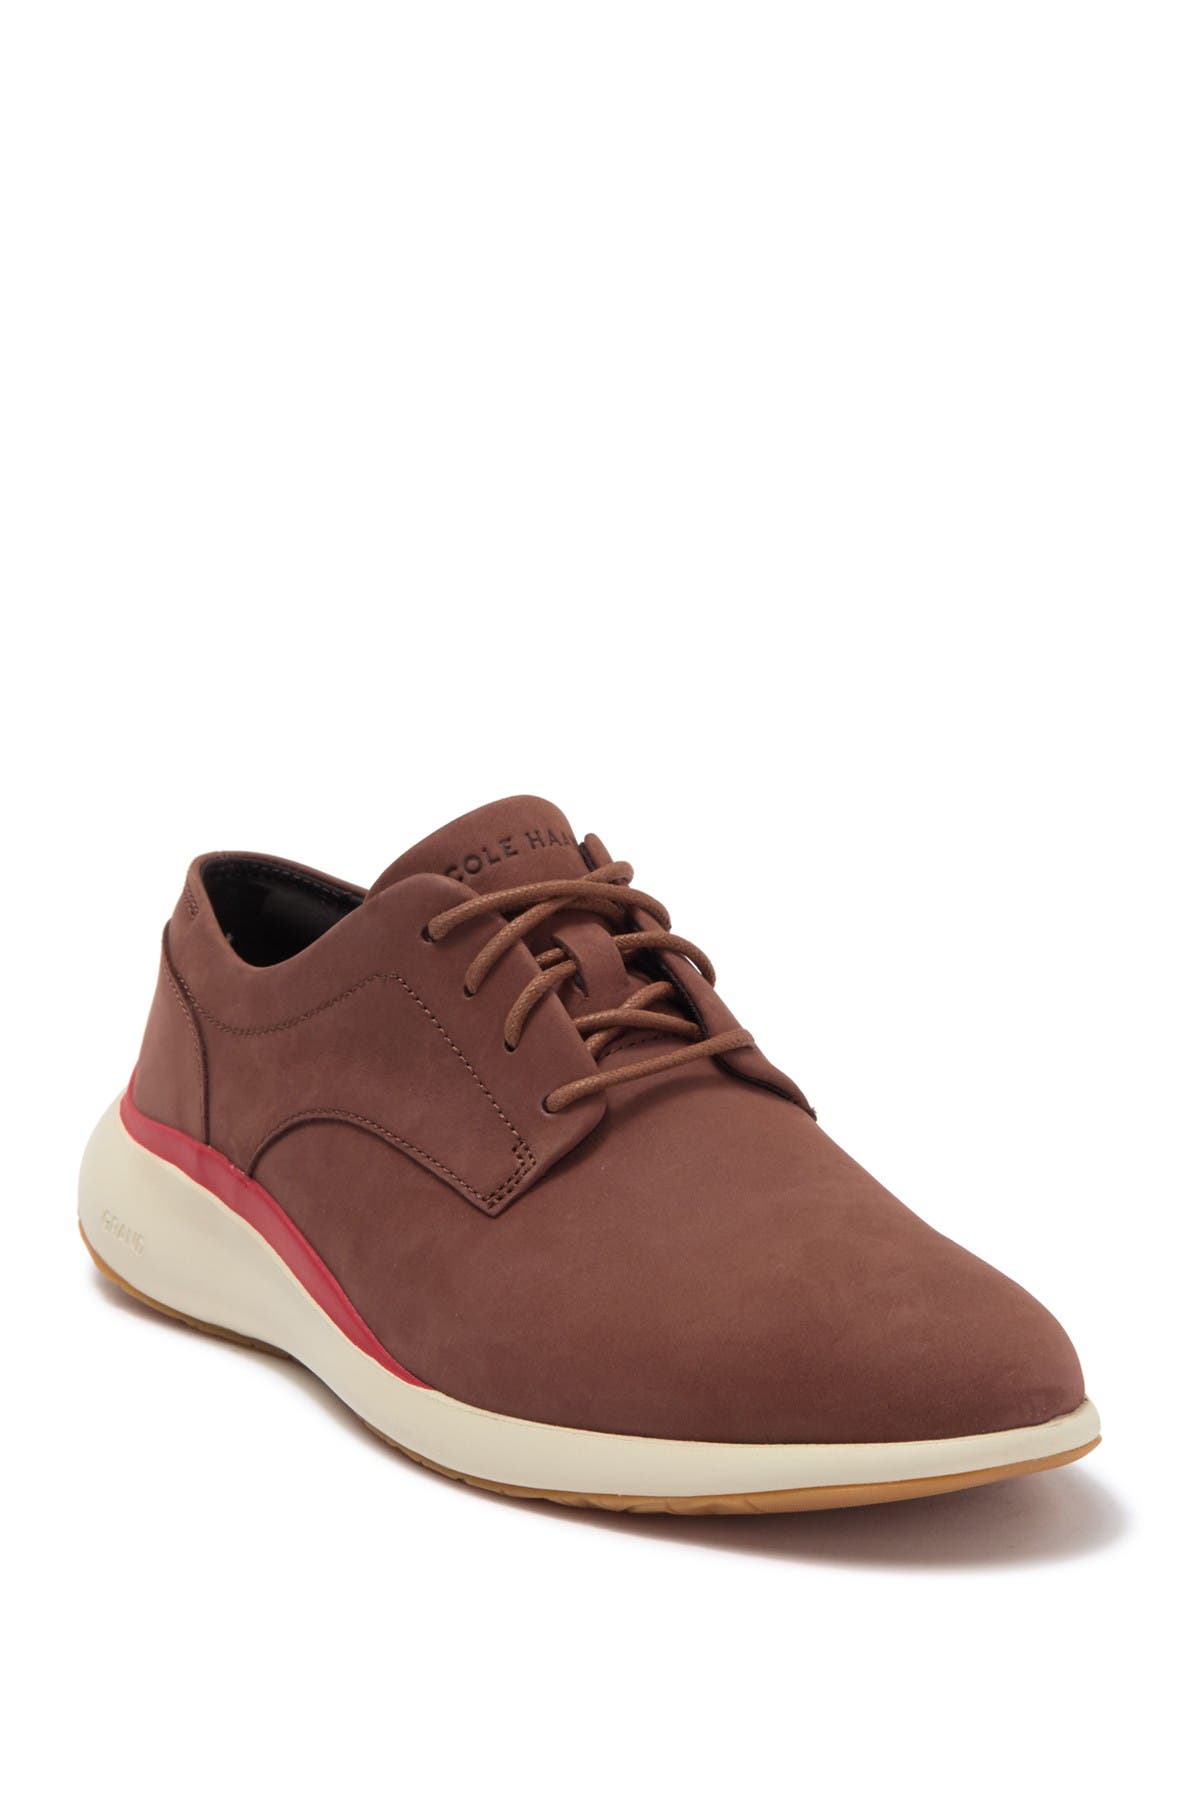 Cole Haan Grand Troy Plain Oxford In Chestnut